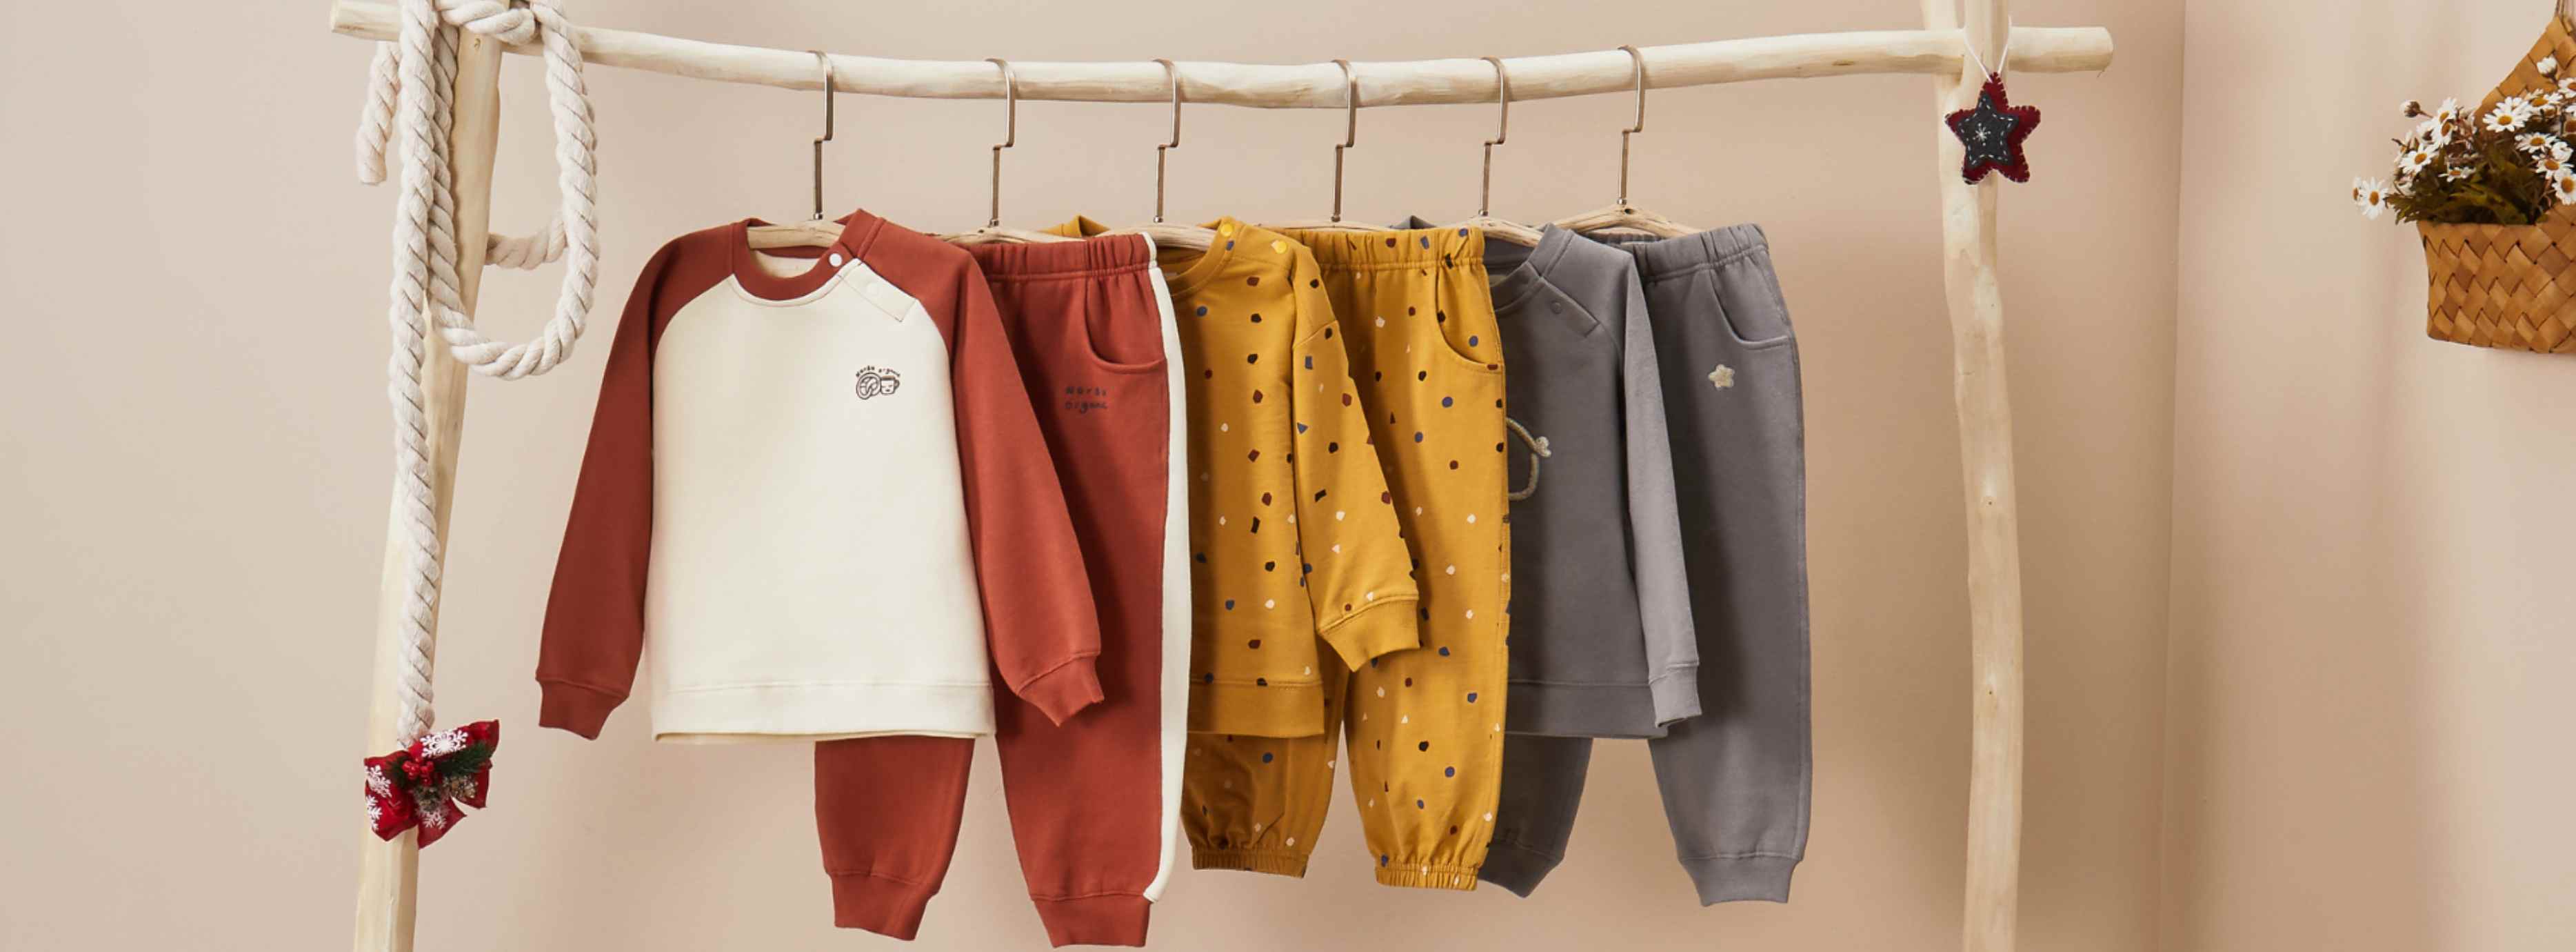 The Harvest Season - New Gender-Neutral Baby Clothes